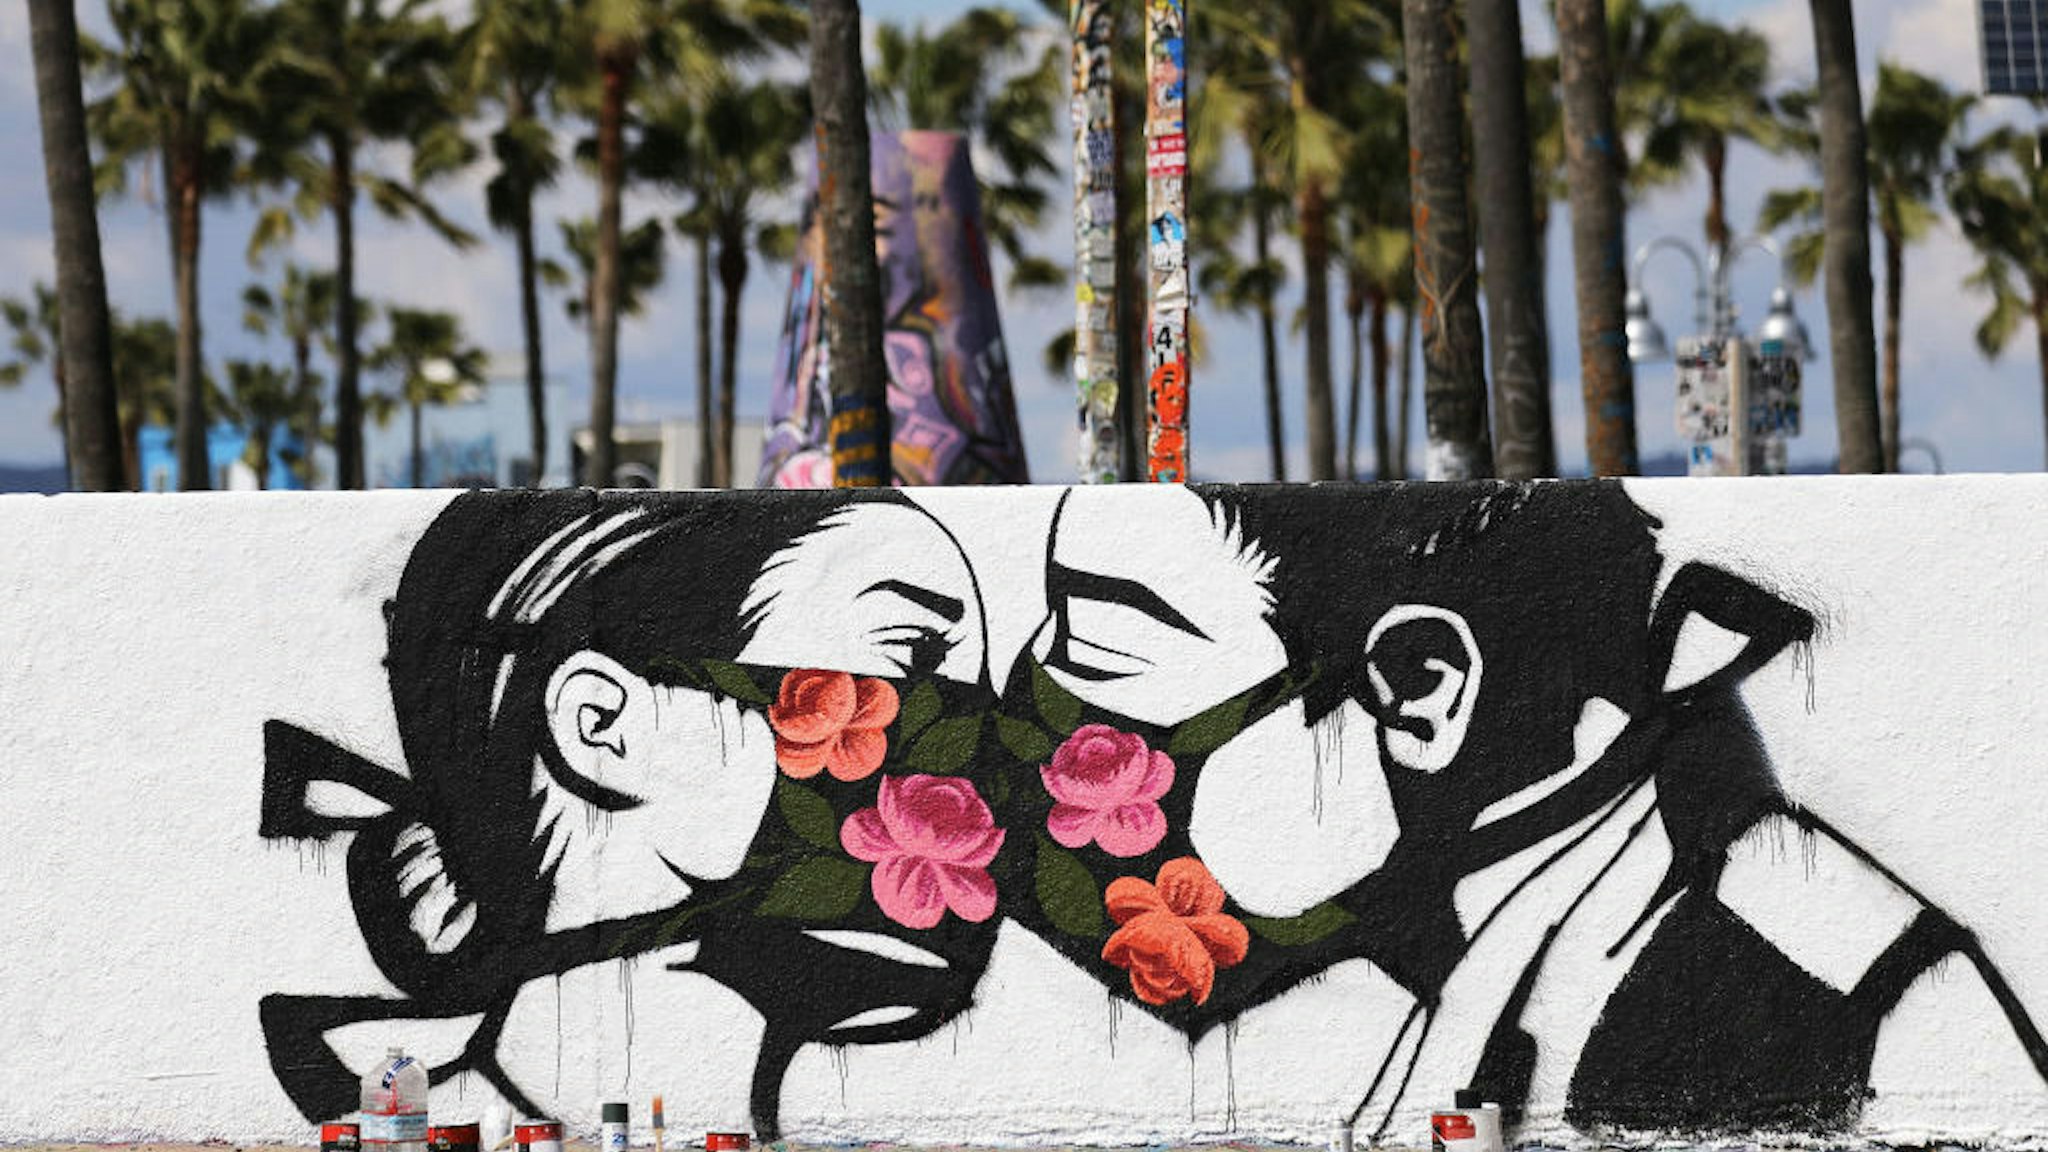 Palm trees stand behind a street art piece by artist Pony Wave depicting two people kissing while wearing face masks on Venice Beach on March 21, 2020 in Venice, California. California Governor Gavin Newsom issued a ‚Äòstay at home‚Äô order for California‚Äôs 40 million residents in order to slow the spread of coronavirus (COVID-19). Californians may still go to the beach without violating Newsom‚Äôs order as long as they maintain social distancing and adhere to other public health measures related to the coronavirus. (Photo by Mario Tama/Getty Images)